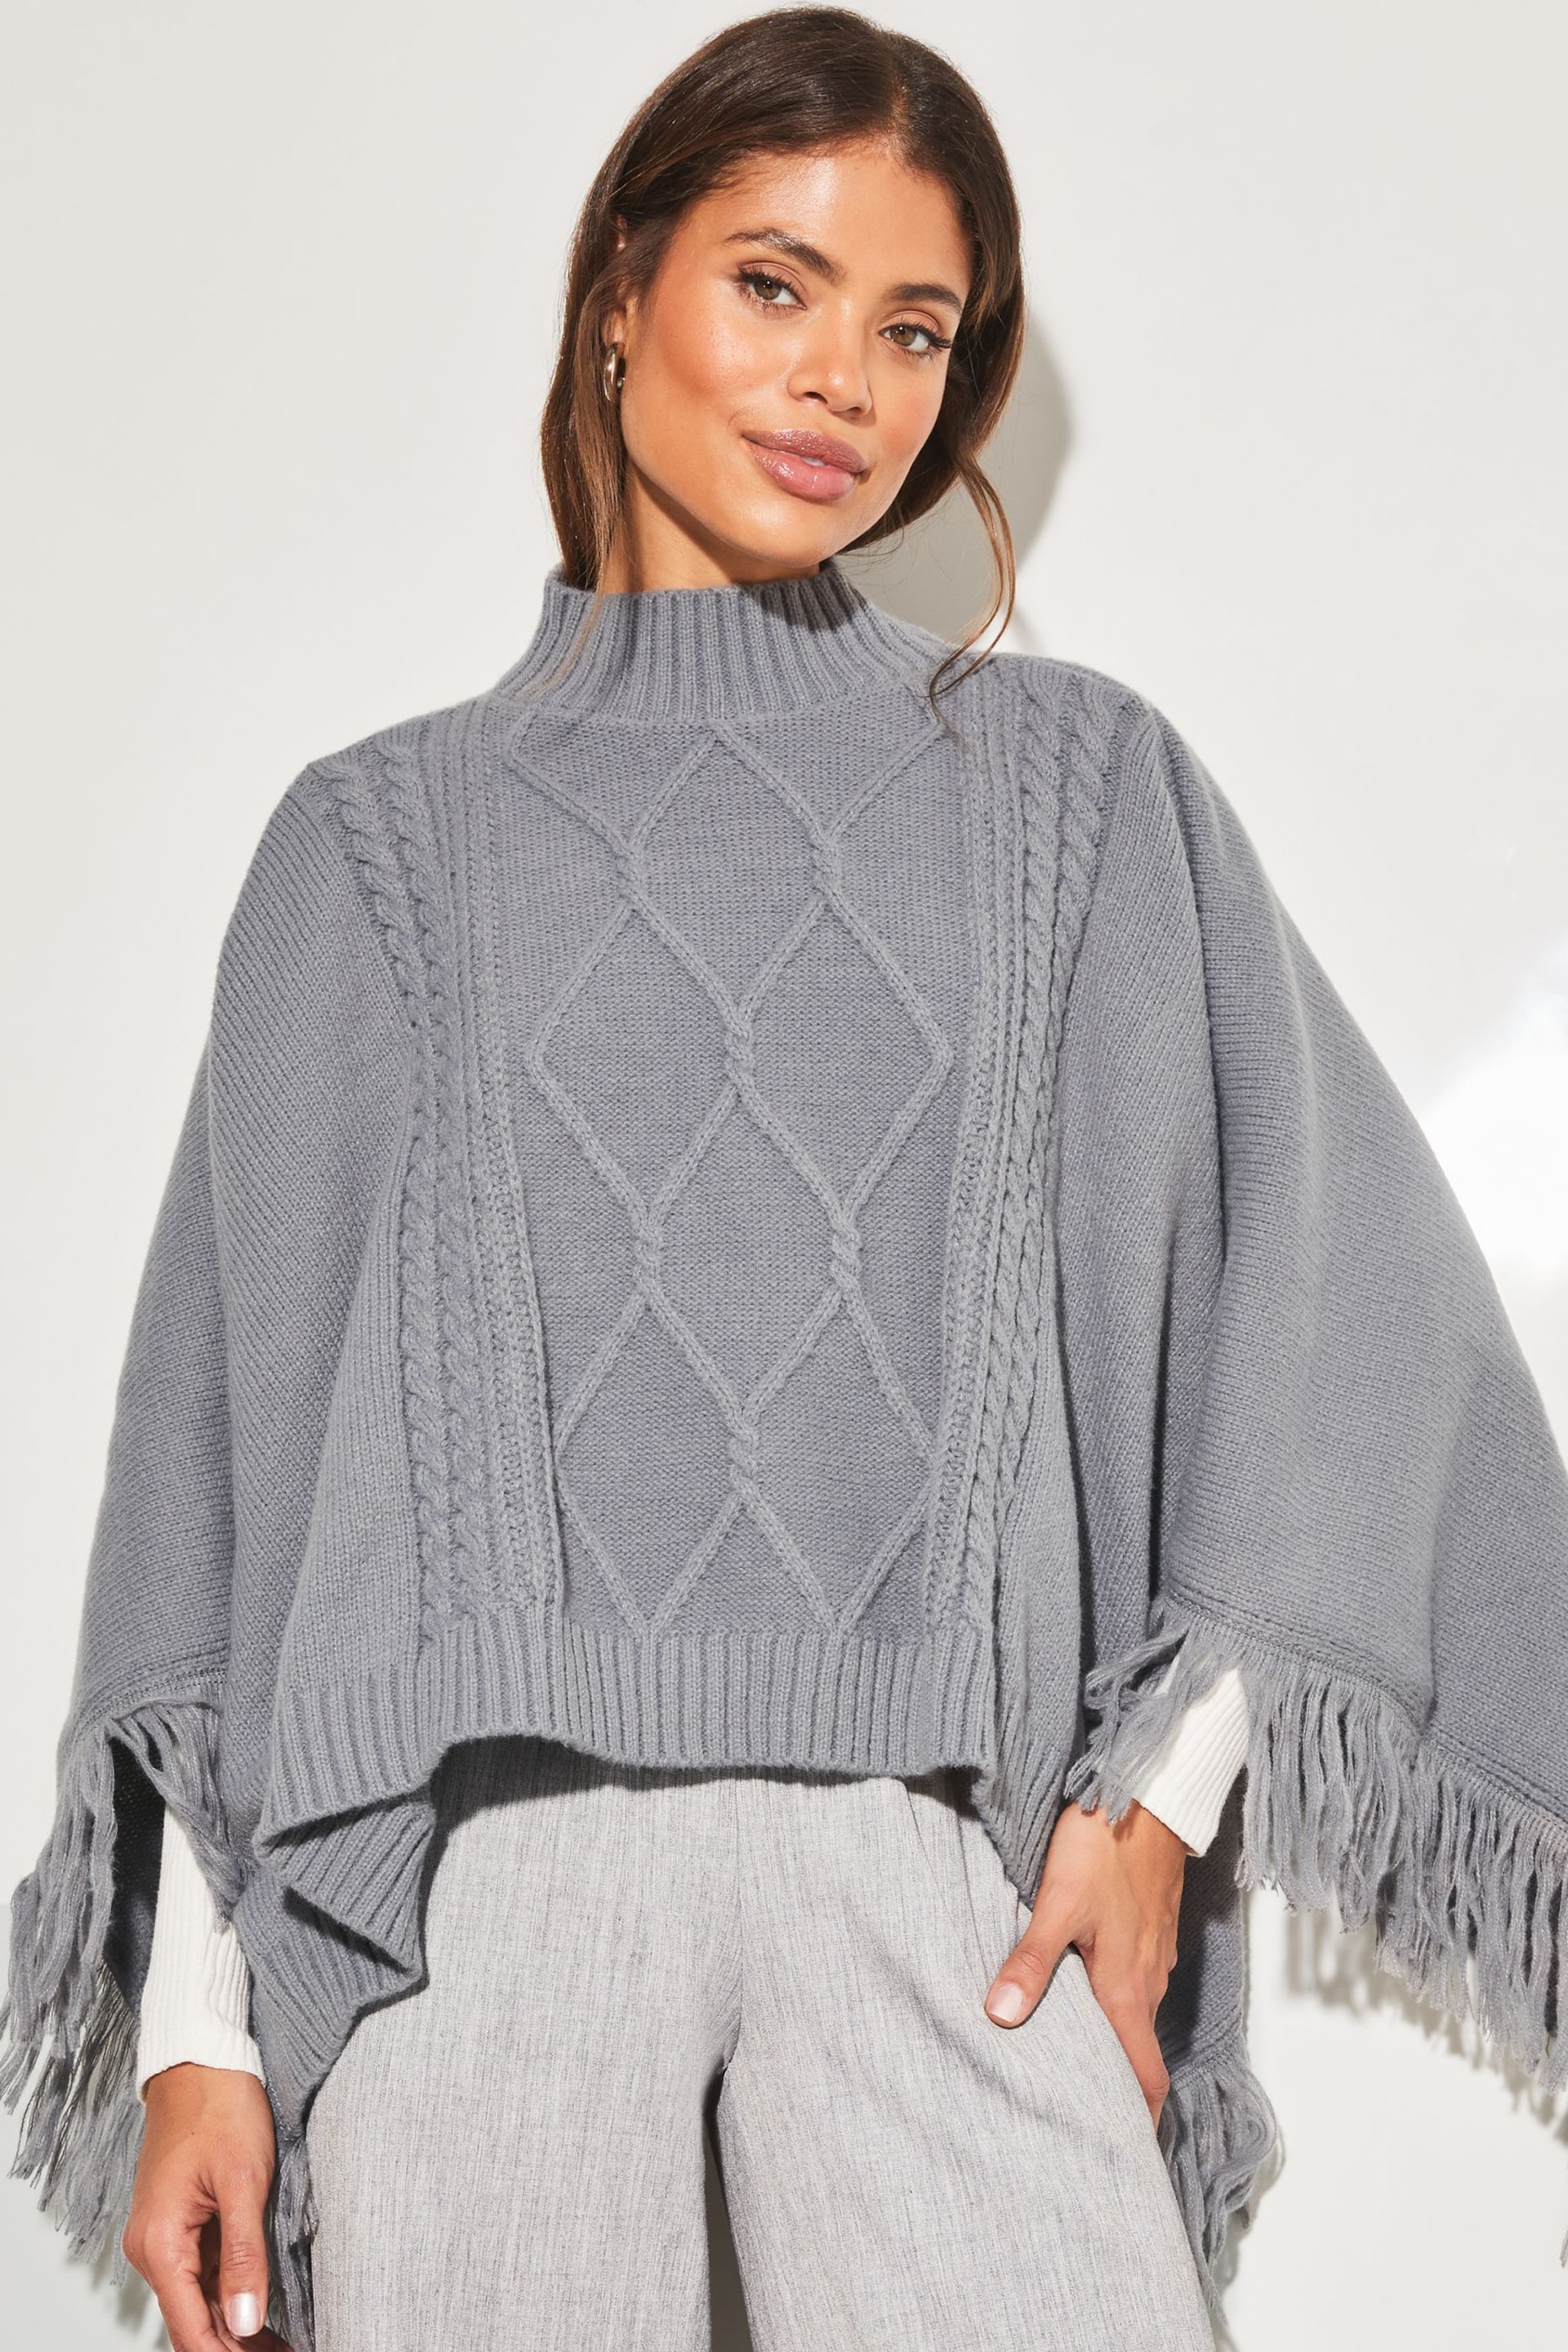 Lipsy Grey Super Soft Cosy Roll Neck Cable Knit Poncho - Image 1 of 4